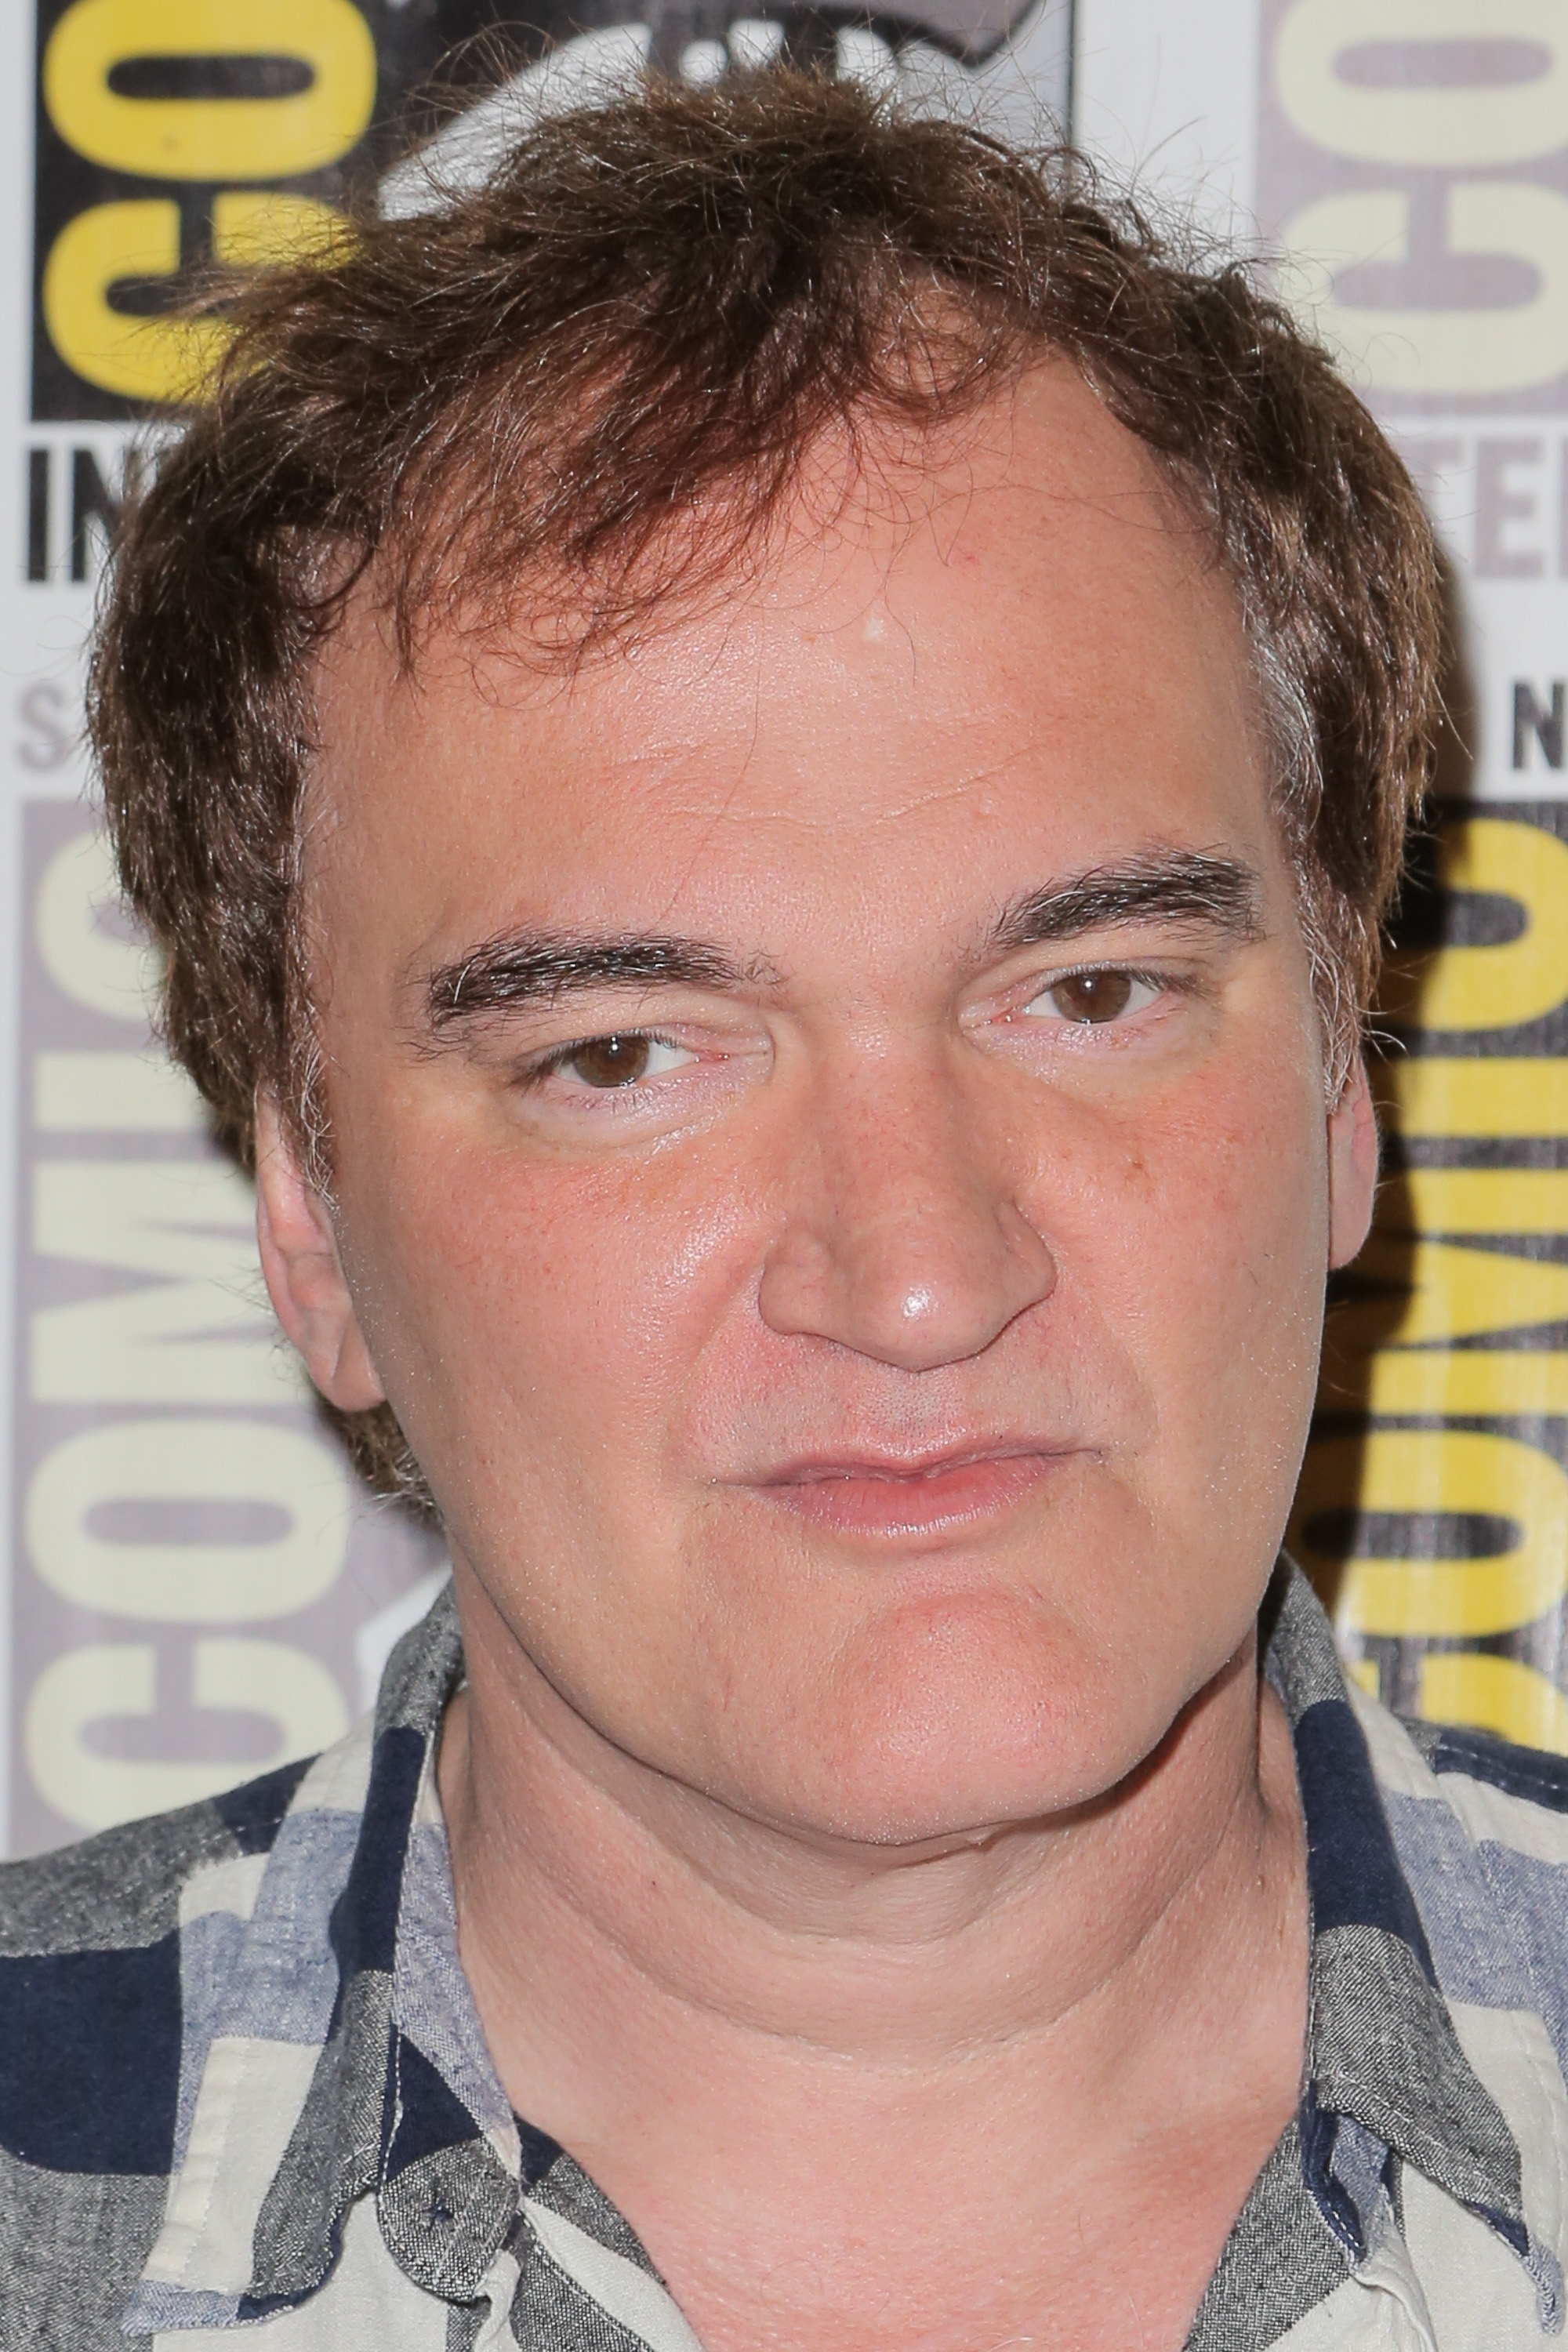 Quentin Tarantino at Comic Con International 2015 in San Diego on July 11, 2015. (Chelsea Lauren—WireImage/Getty Images)